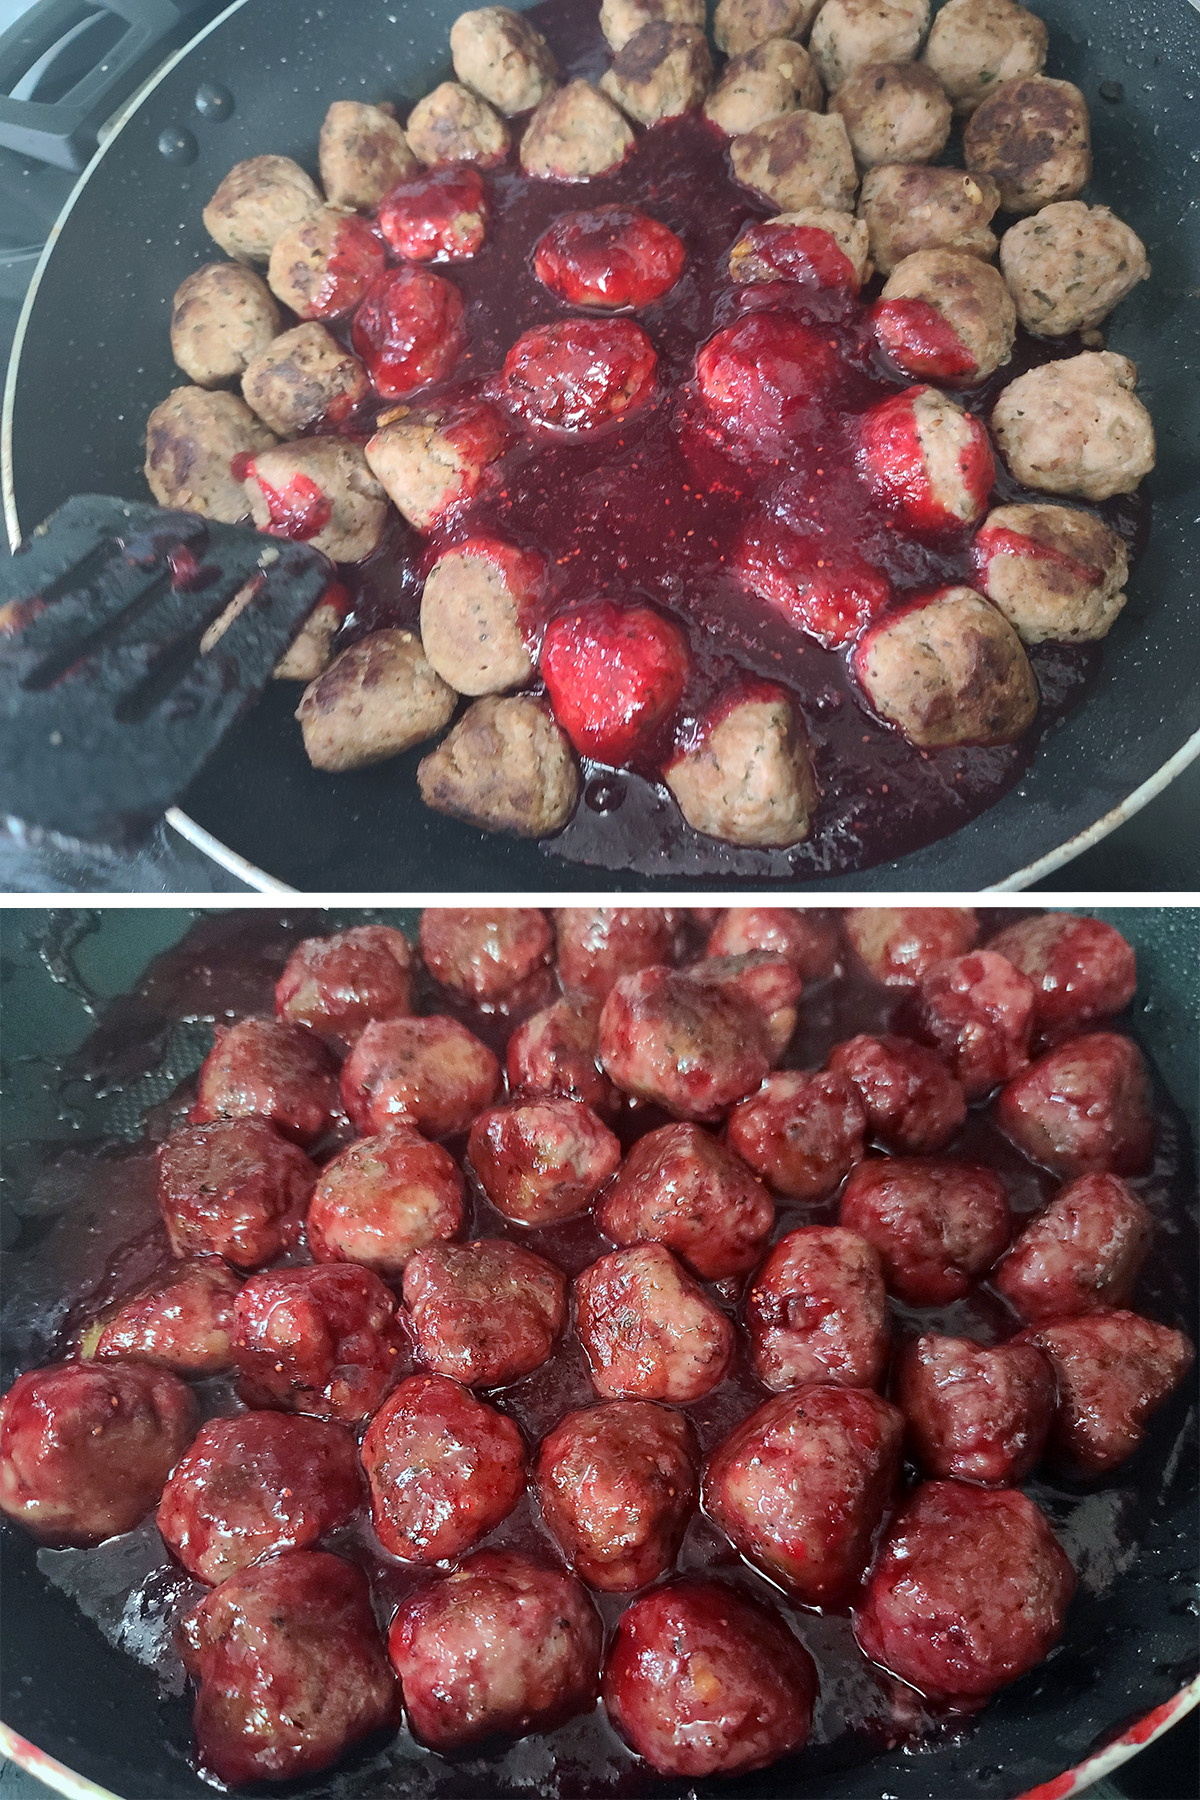 A 2 part image showing the cranberry glaze being poured into the pan of meatballs, then after it's been stirred to coat the meatballs.